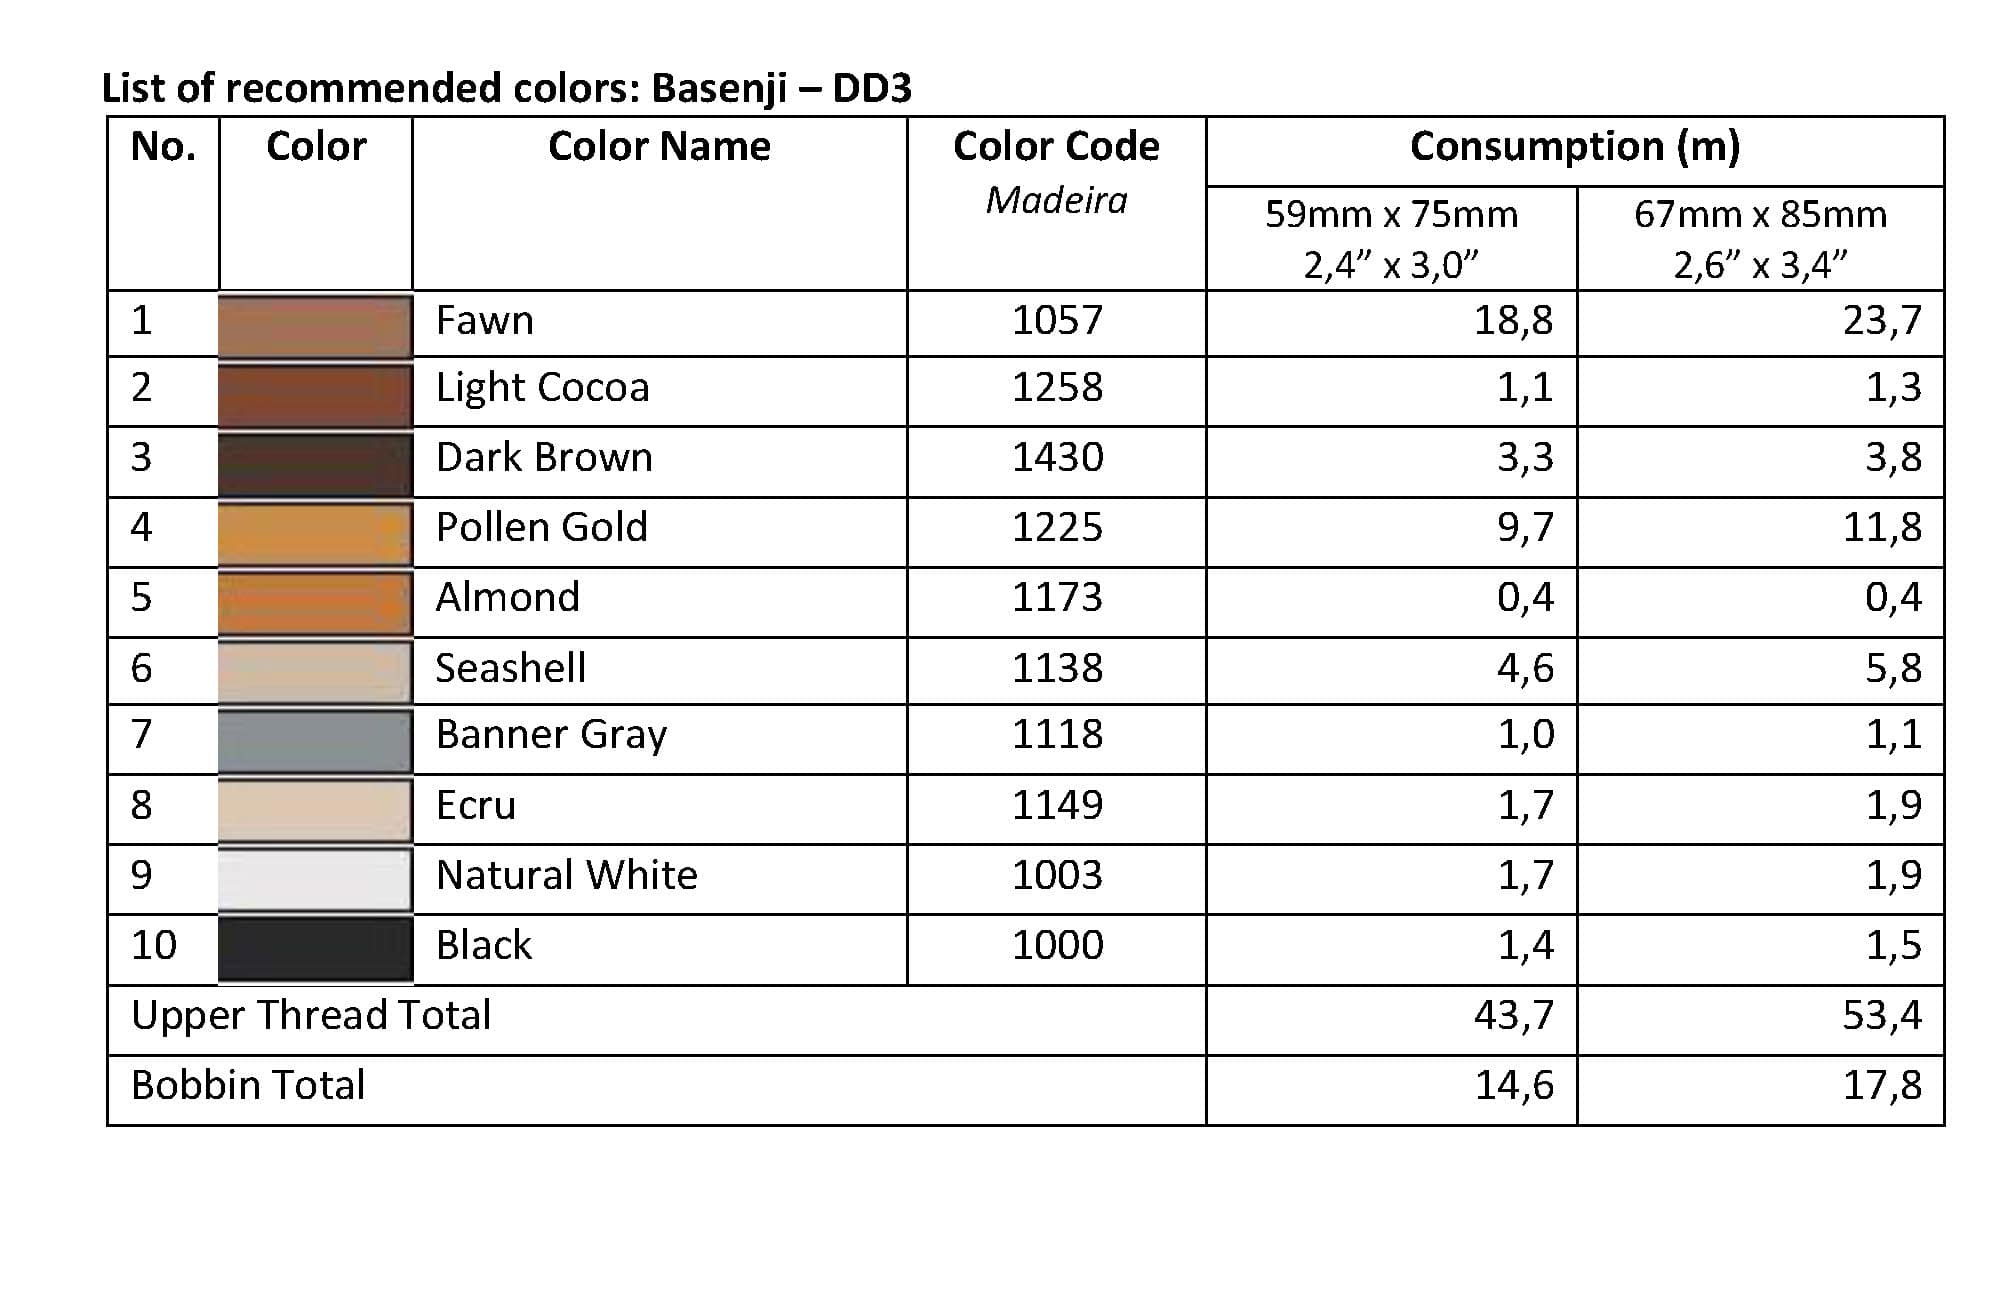 List of Recommended Colors - Basenji DD3